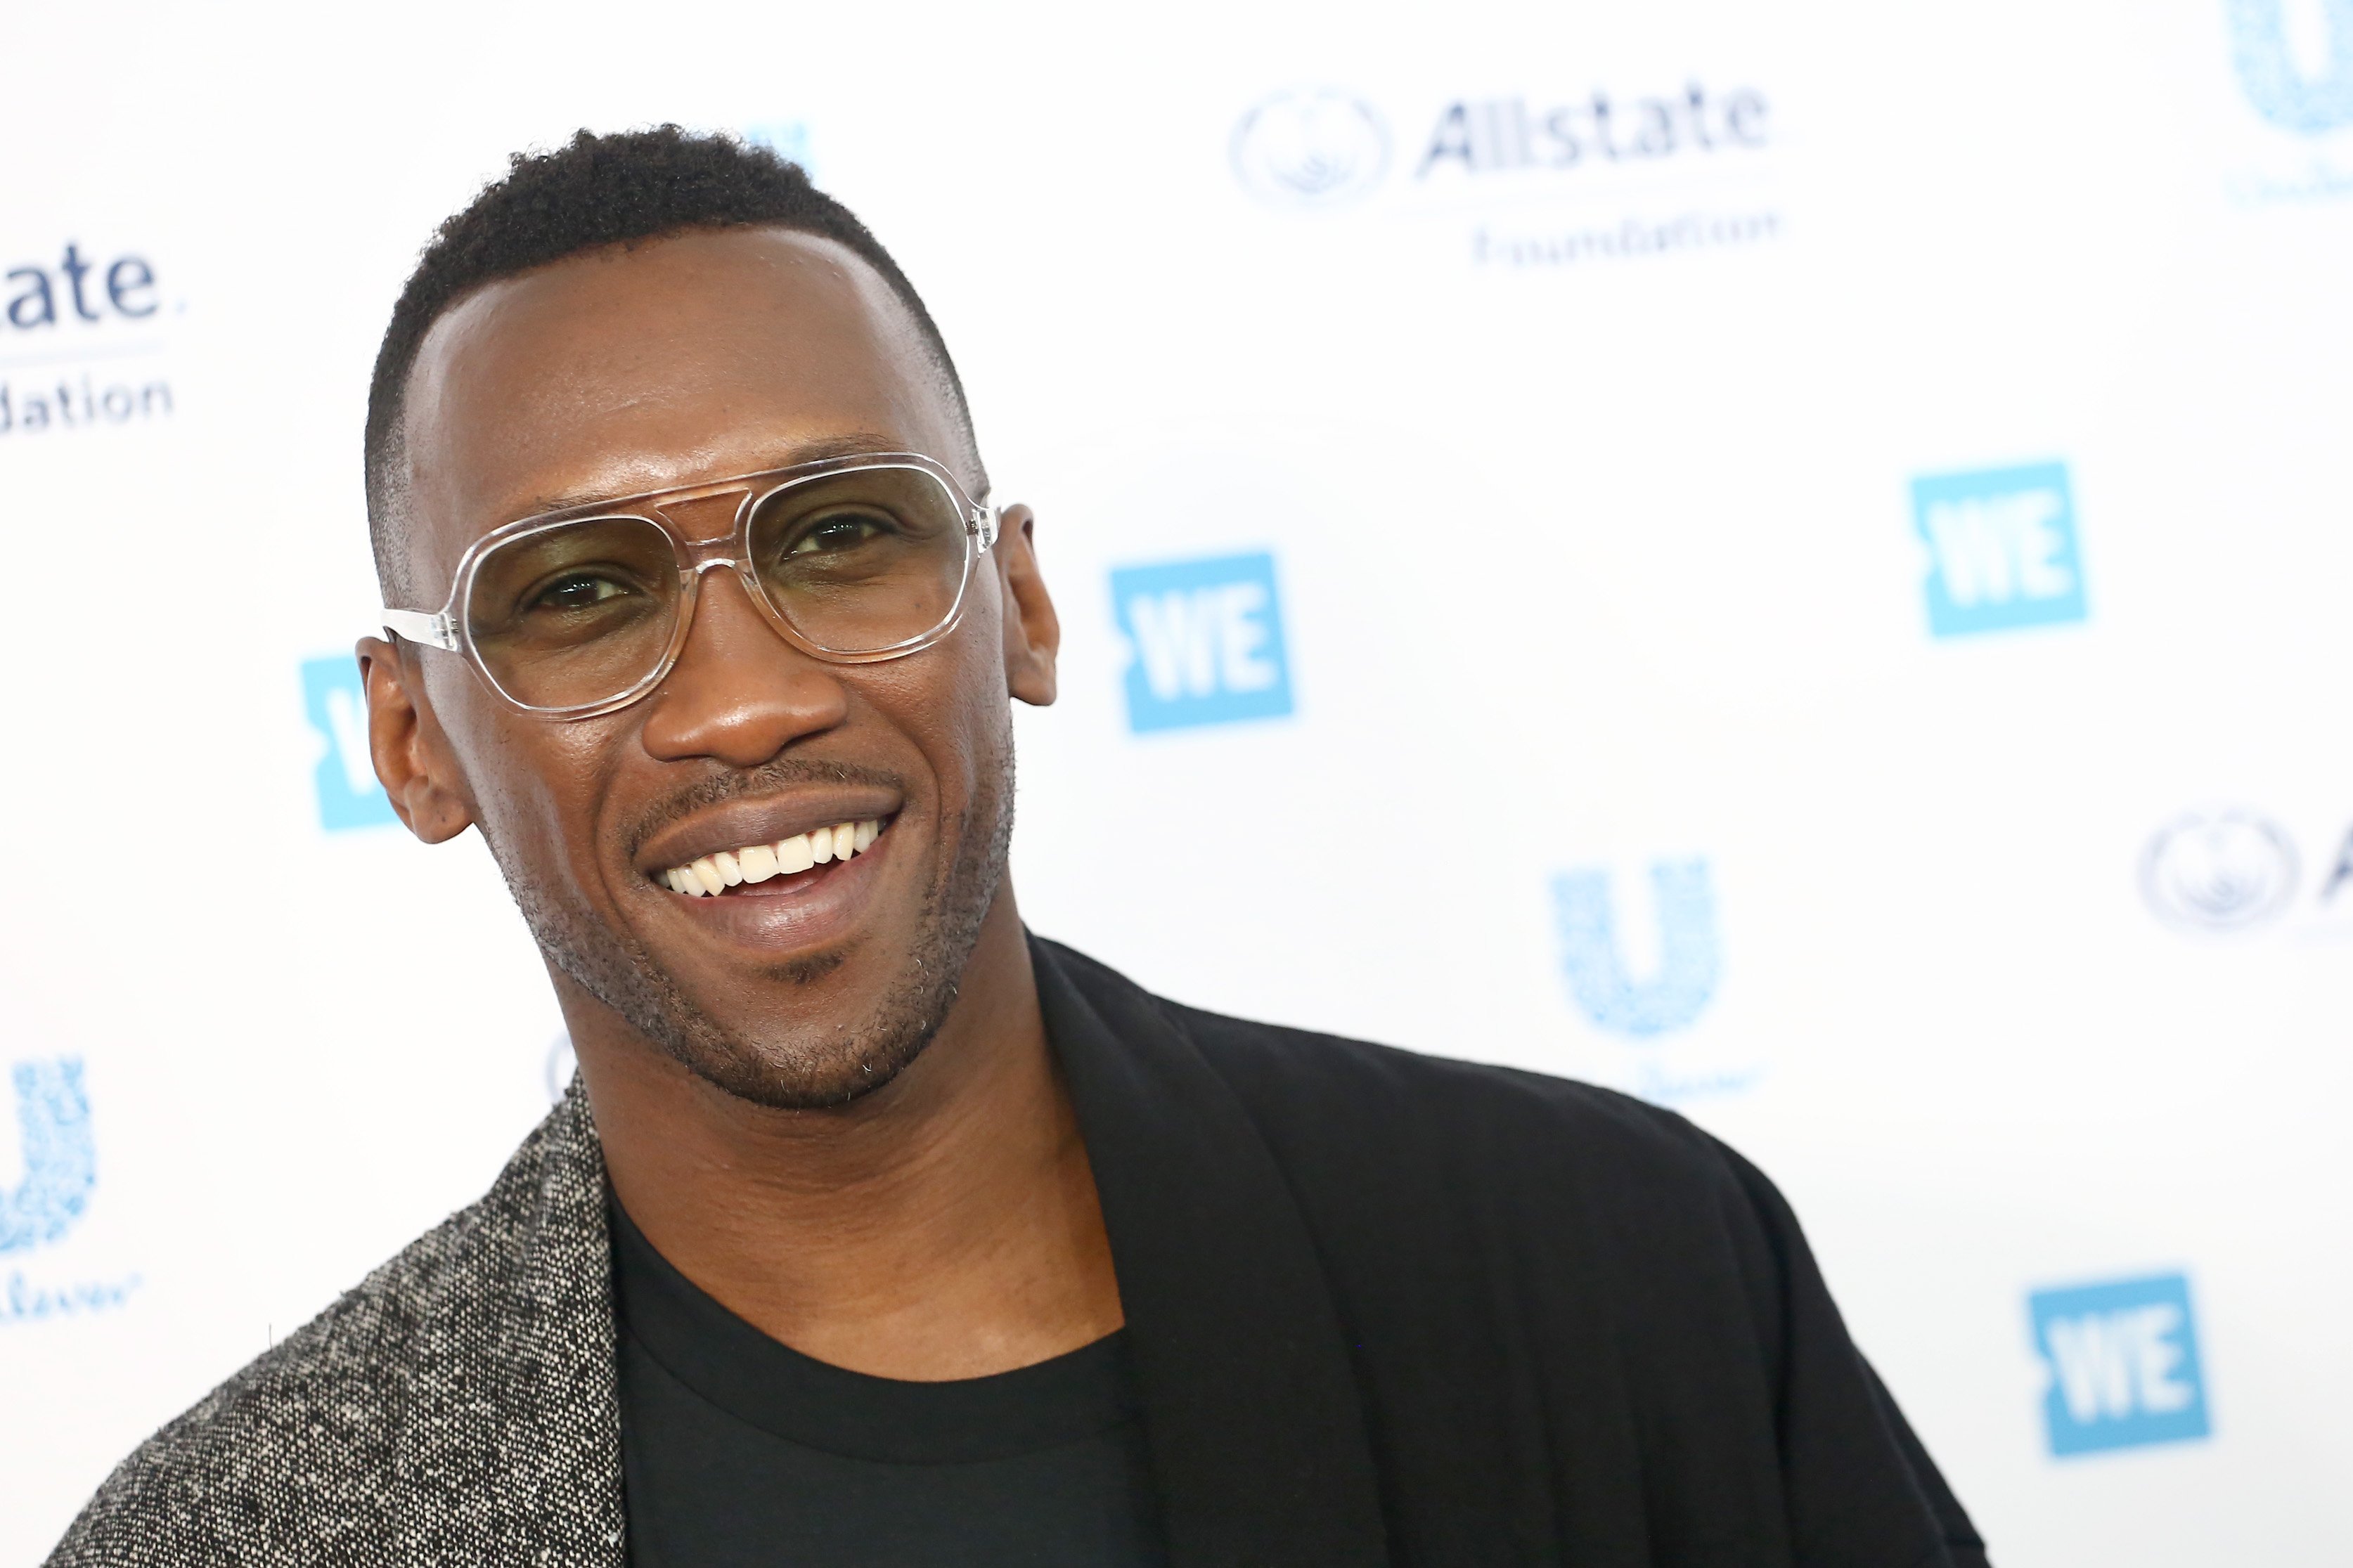 Mahershala Ali in a black t-shirt and dual colored brown and black jacket at an event in 2019.